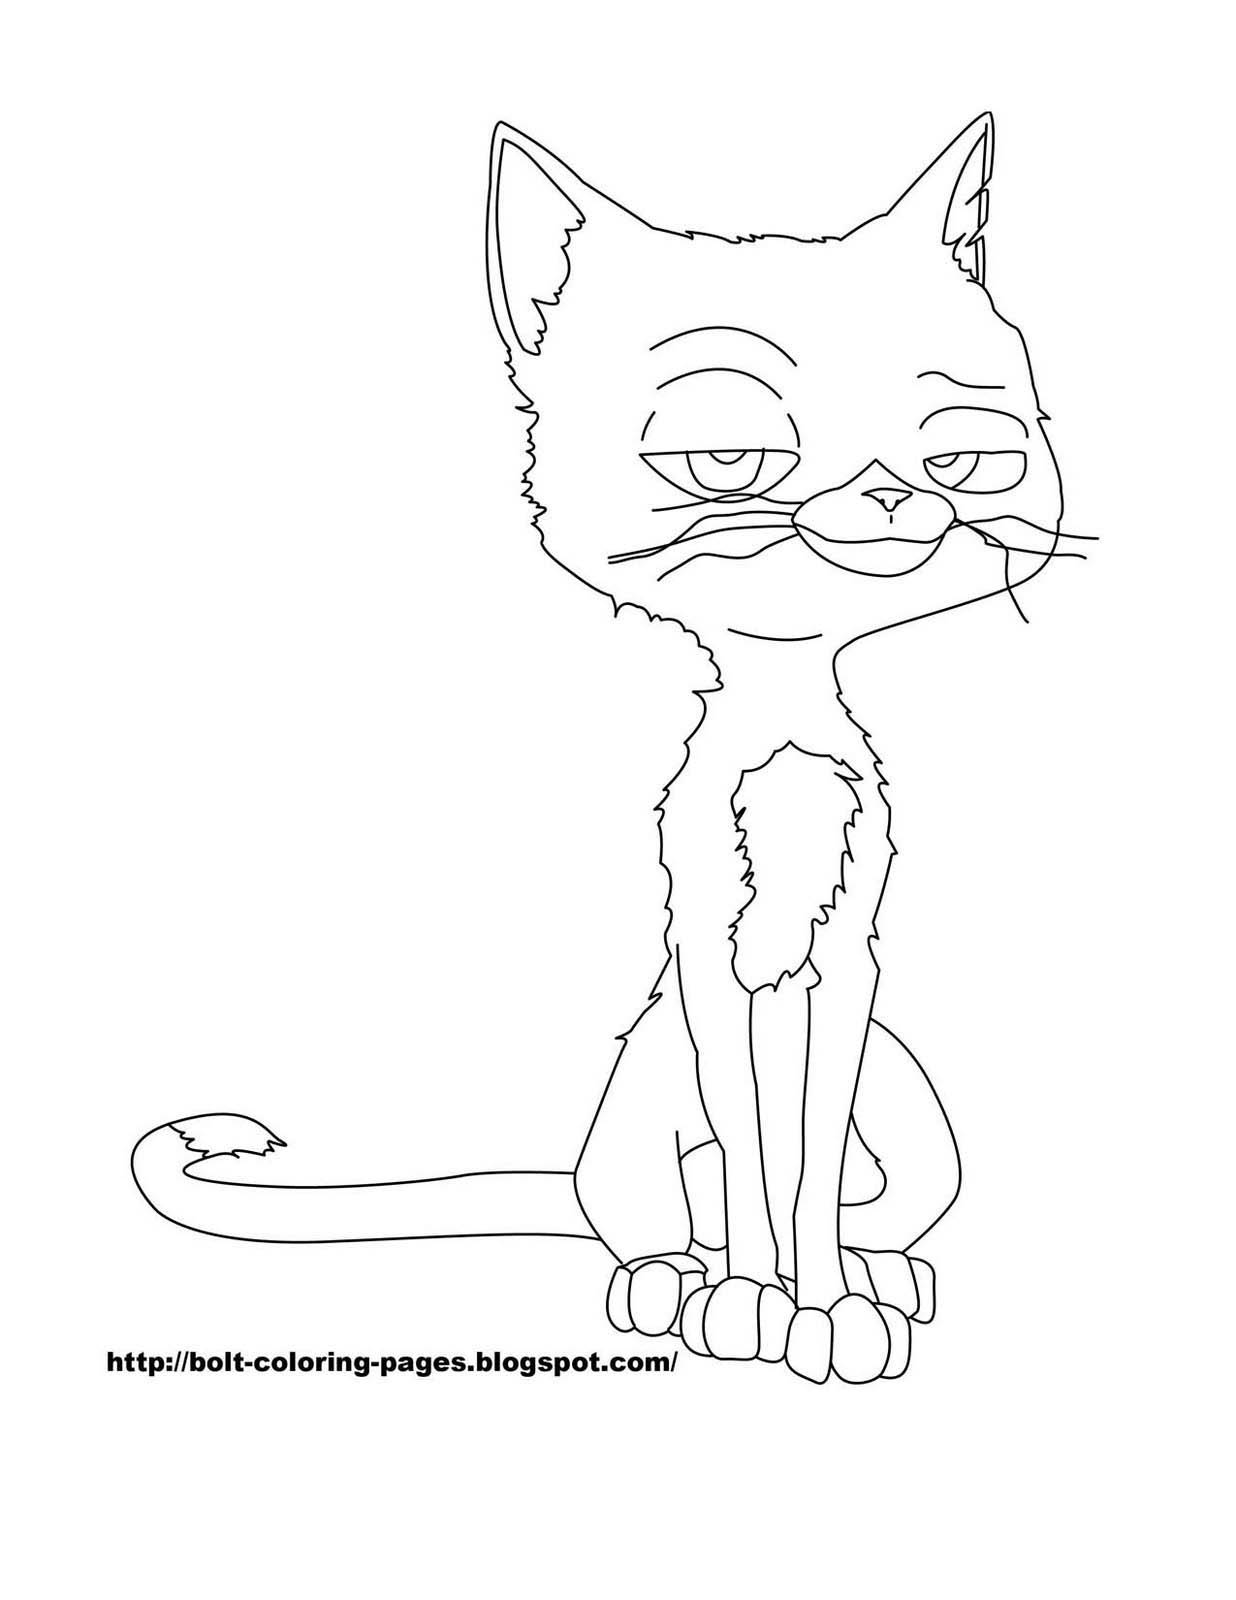 Bolt coloring pages mittens